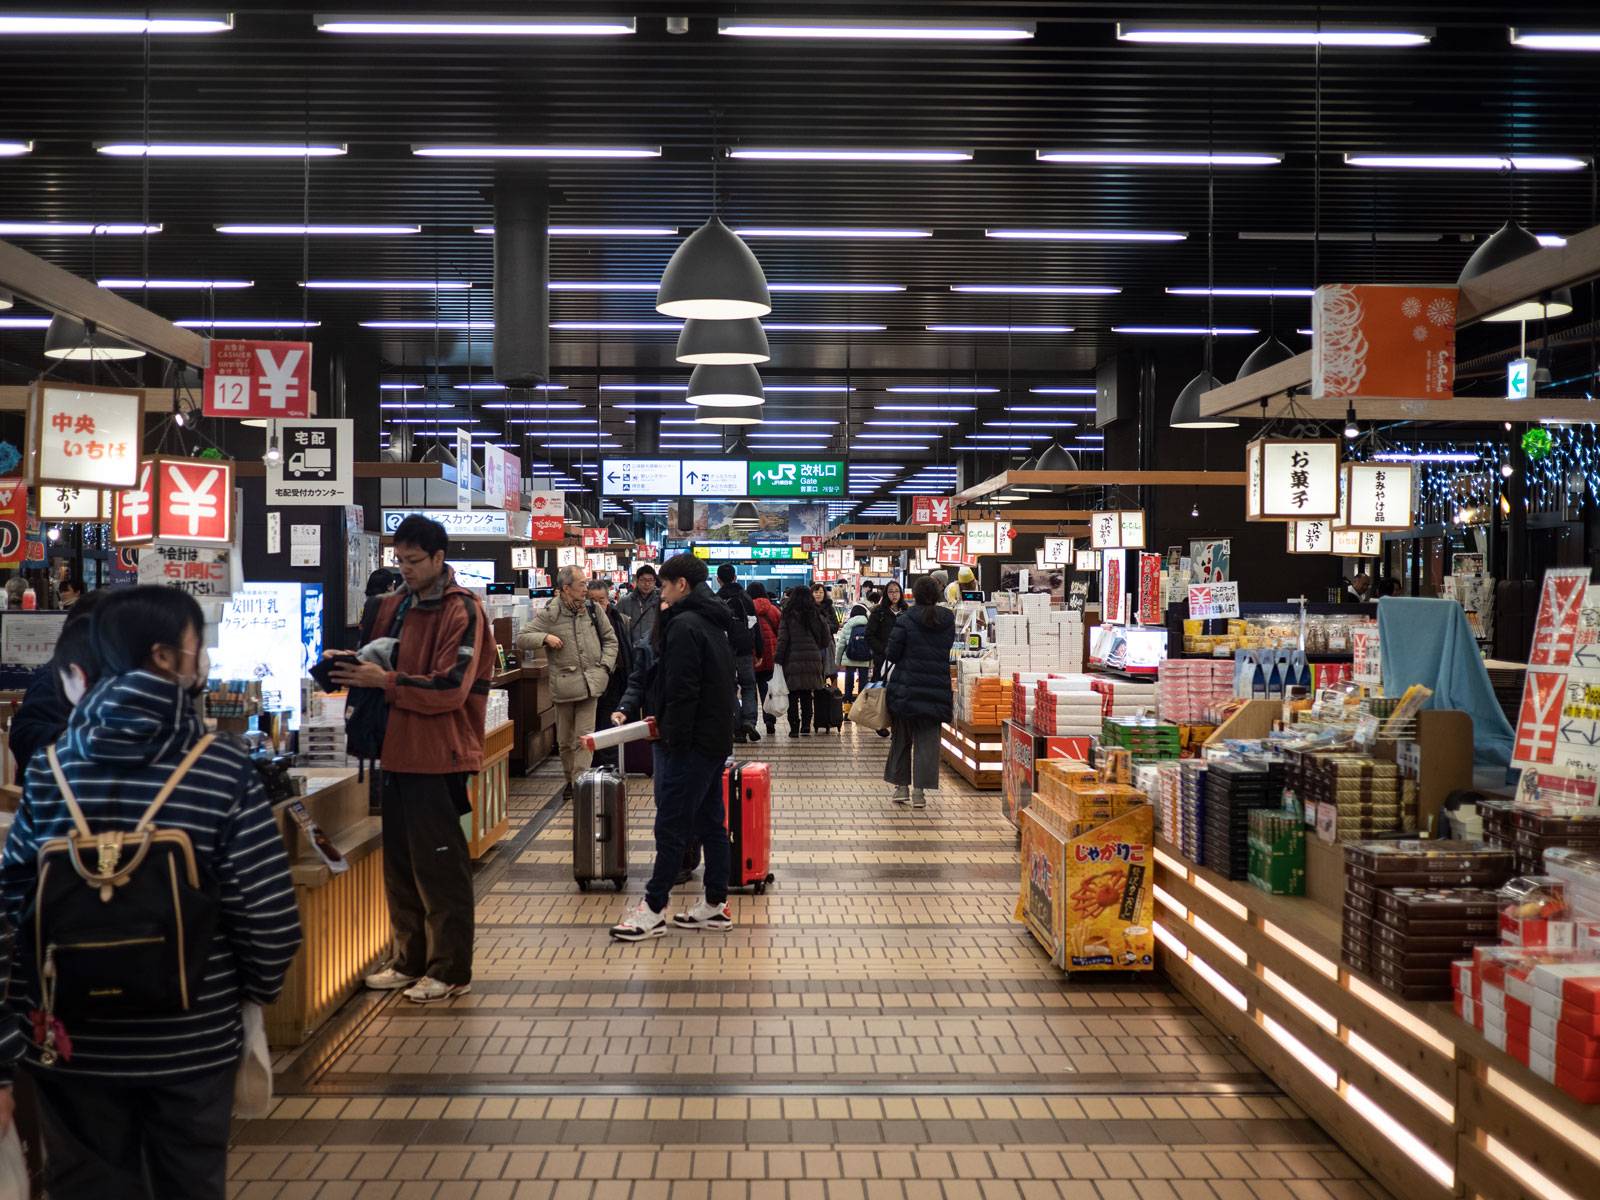 People inside the warm and cozy basement exploring shopping stalls